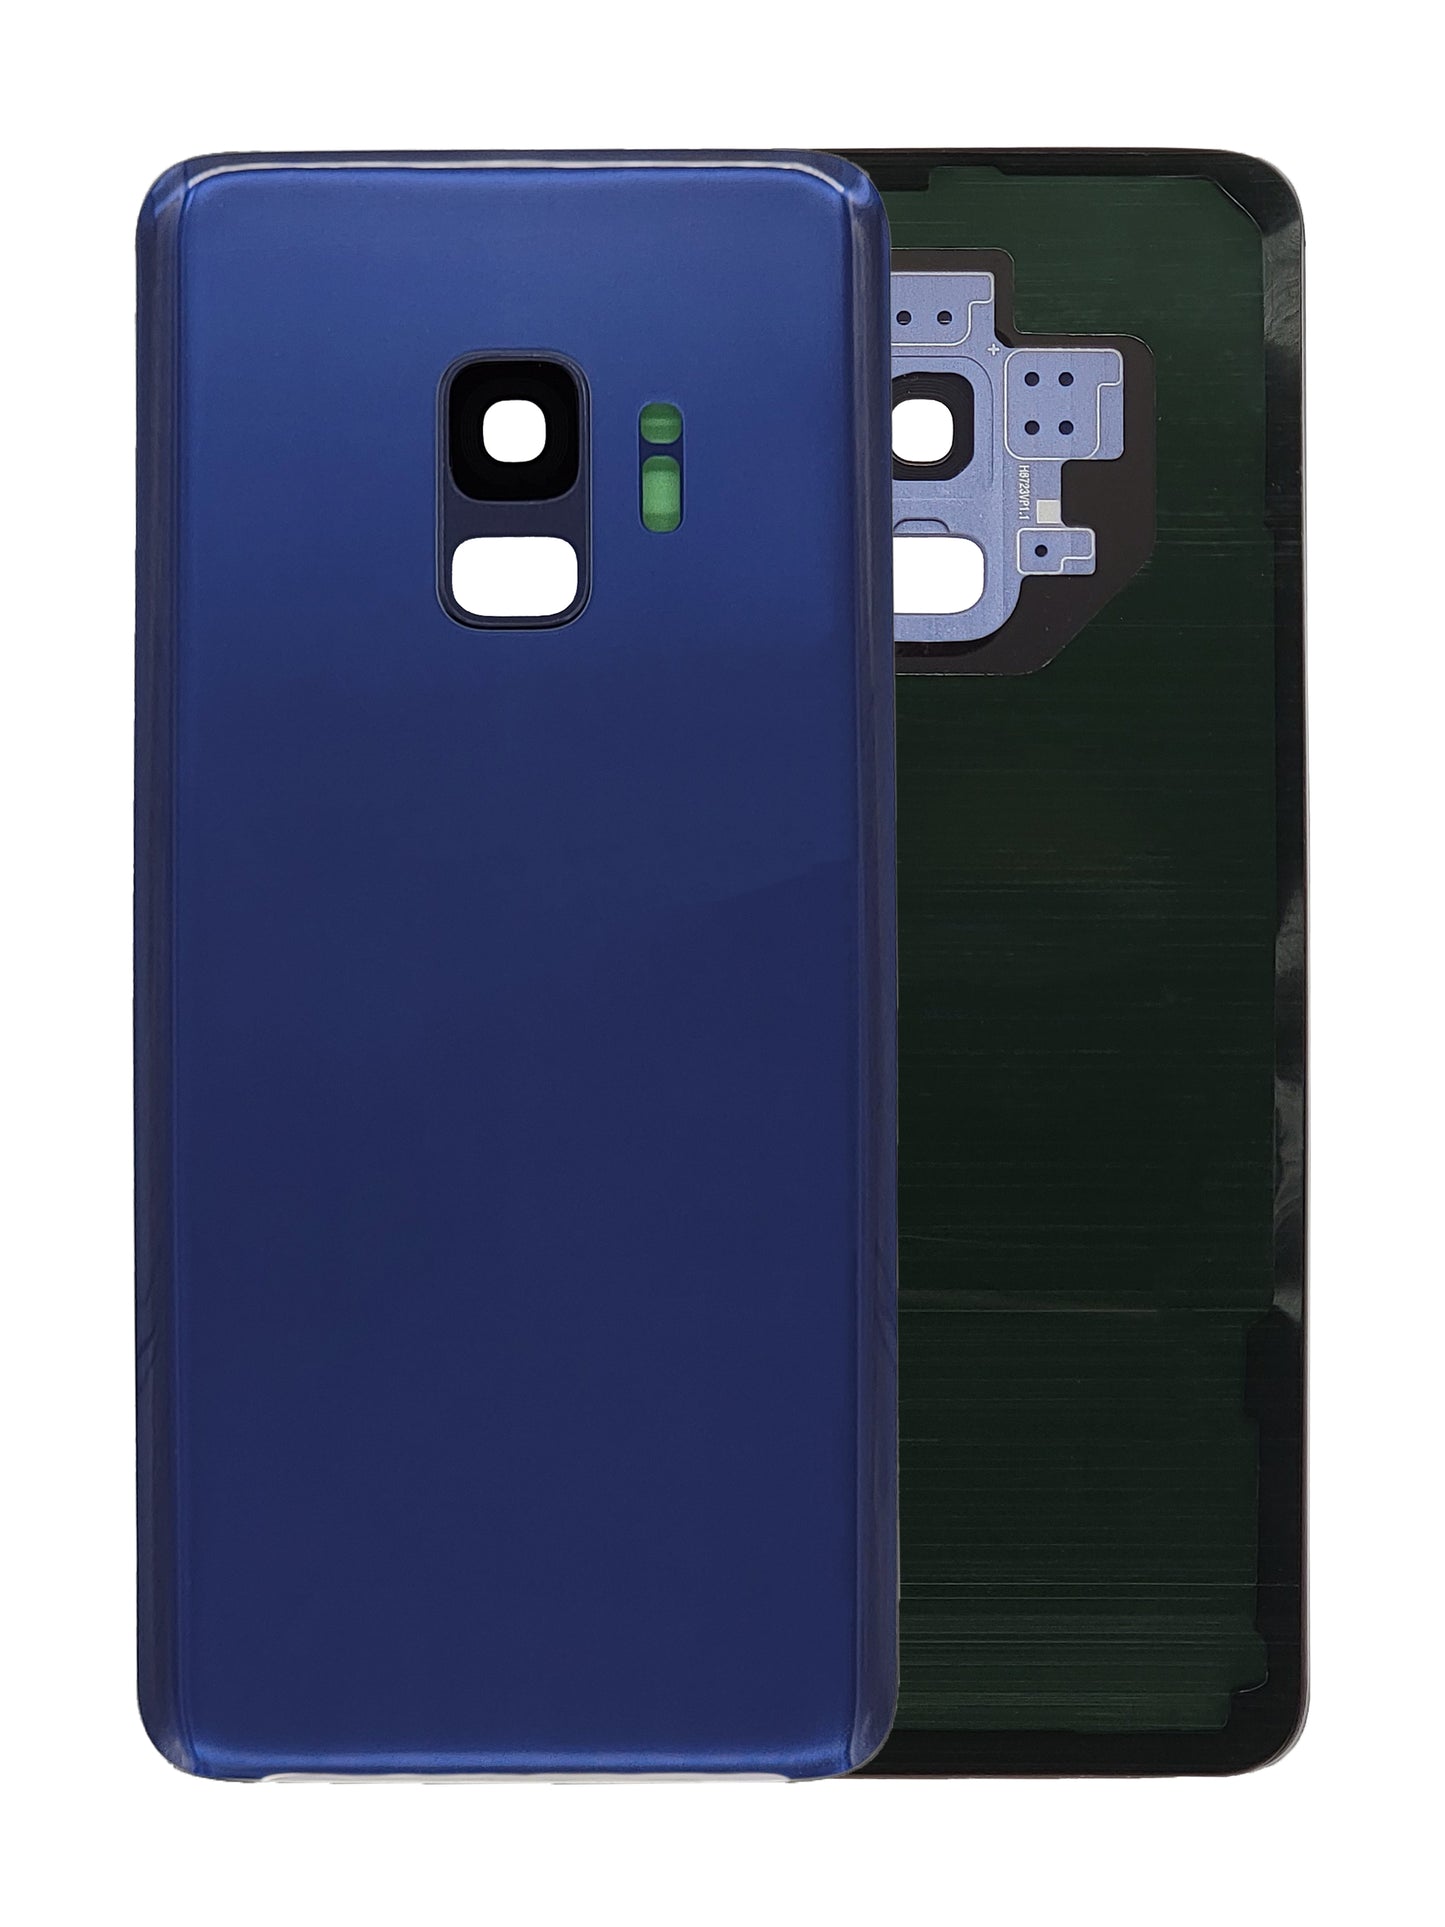 SGS S9 Back Cover (Blue)